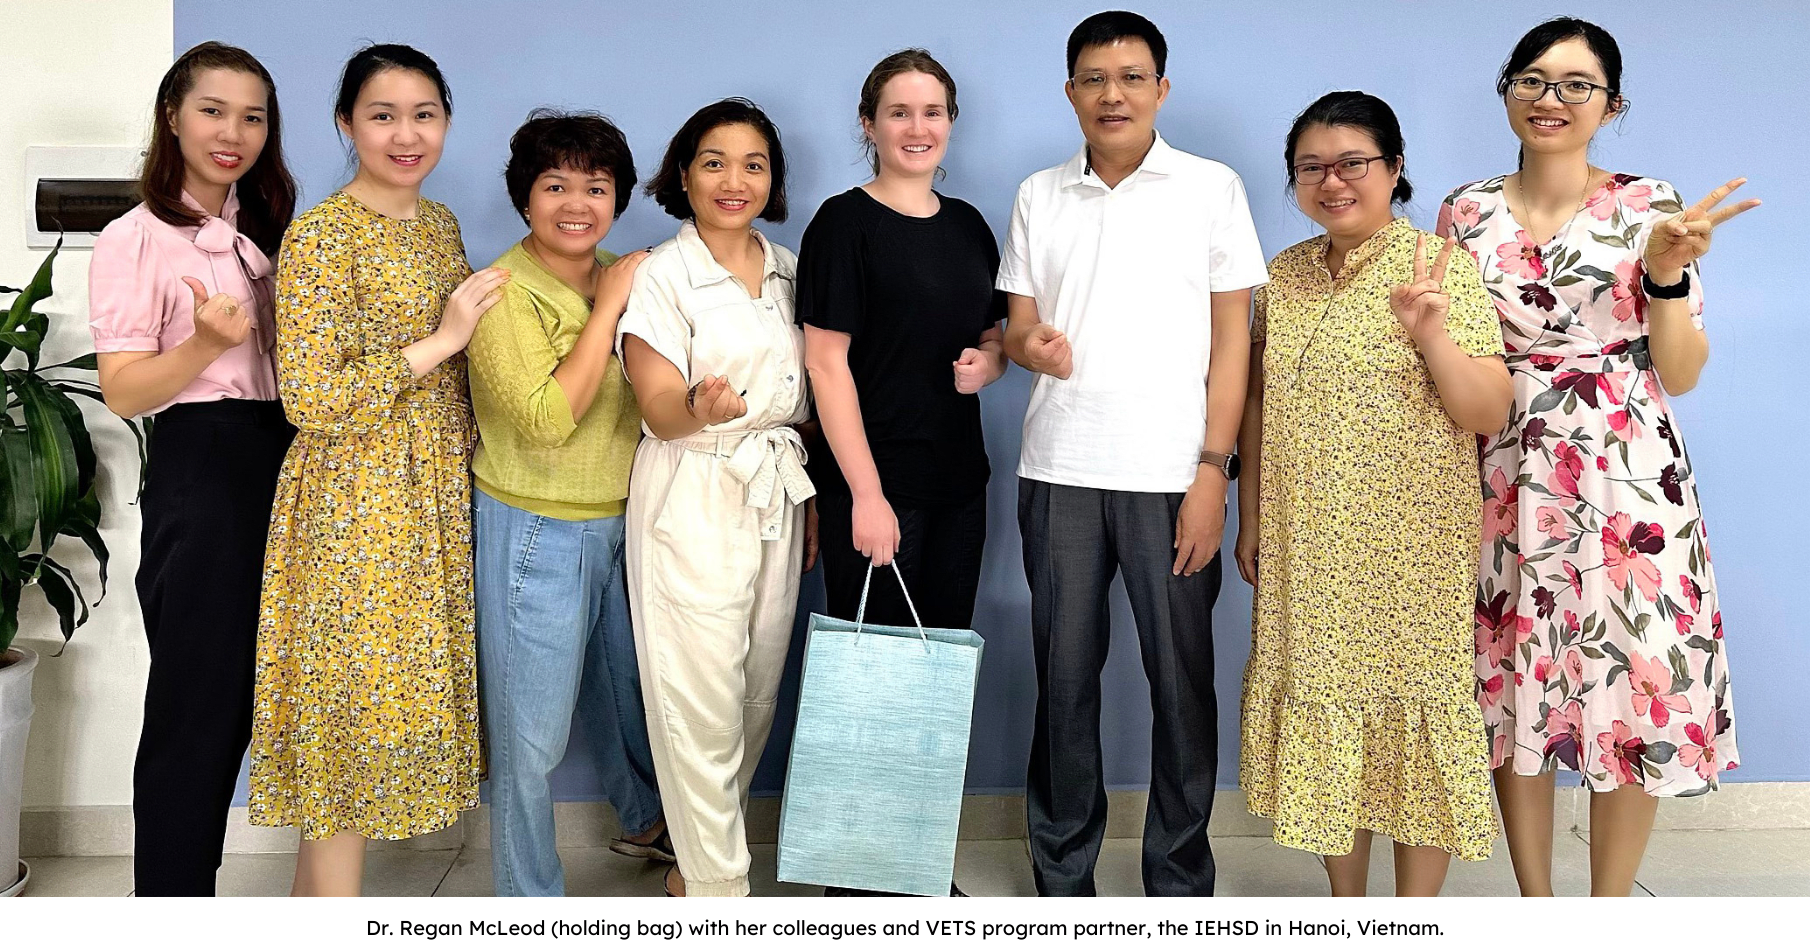 Dr. Regan McLeod (holding bag) with her colleagues and VETS program partner, the IEHSD in Hanoi, Vietnam.